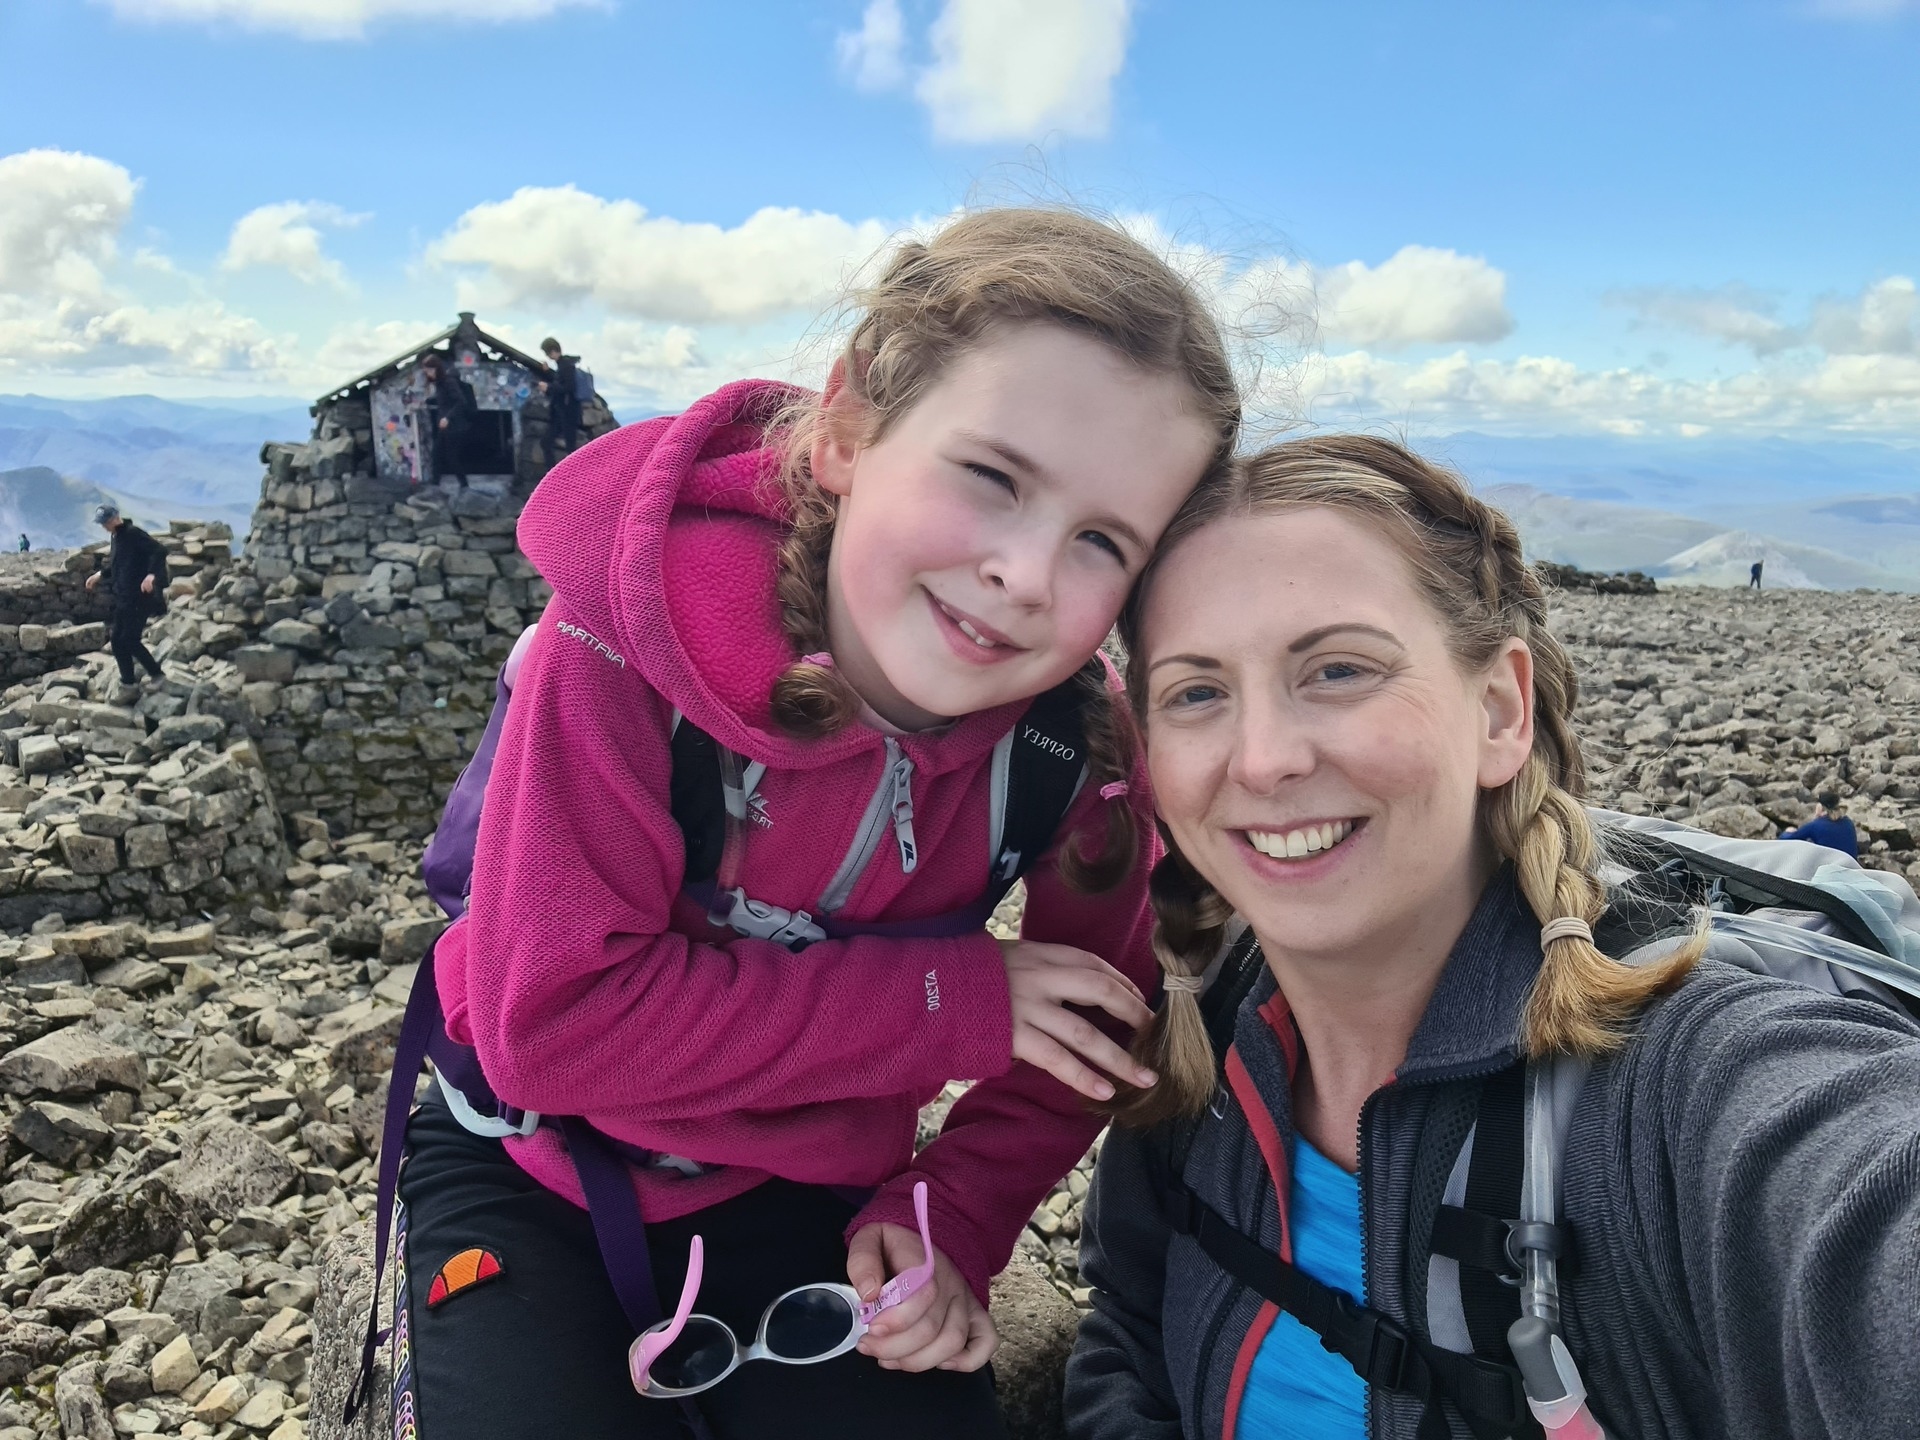 The mother-daughter duo said the climb took around 11 hours.